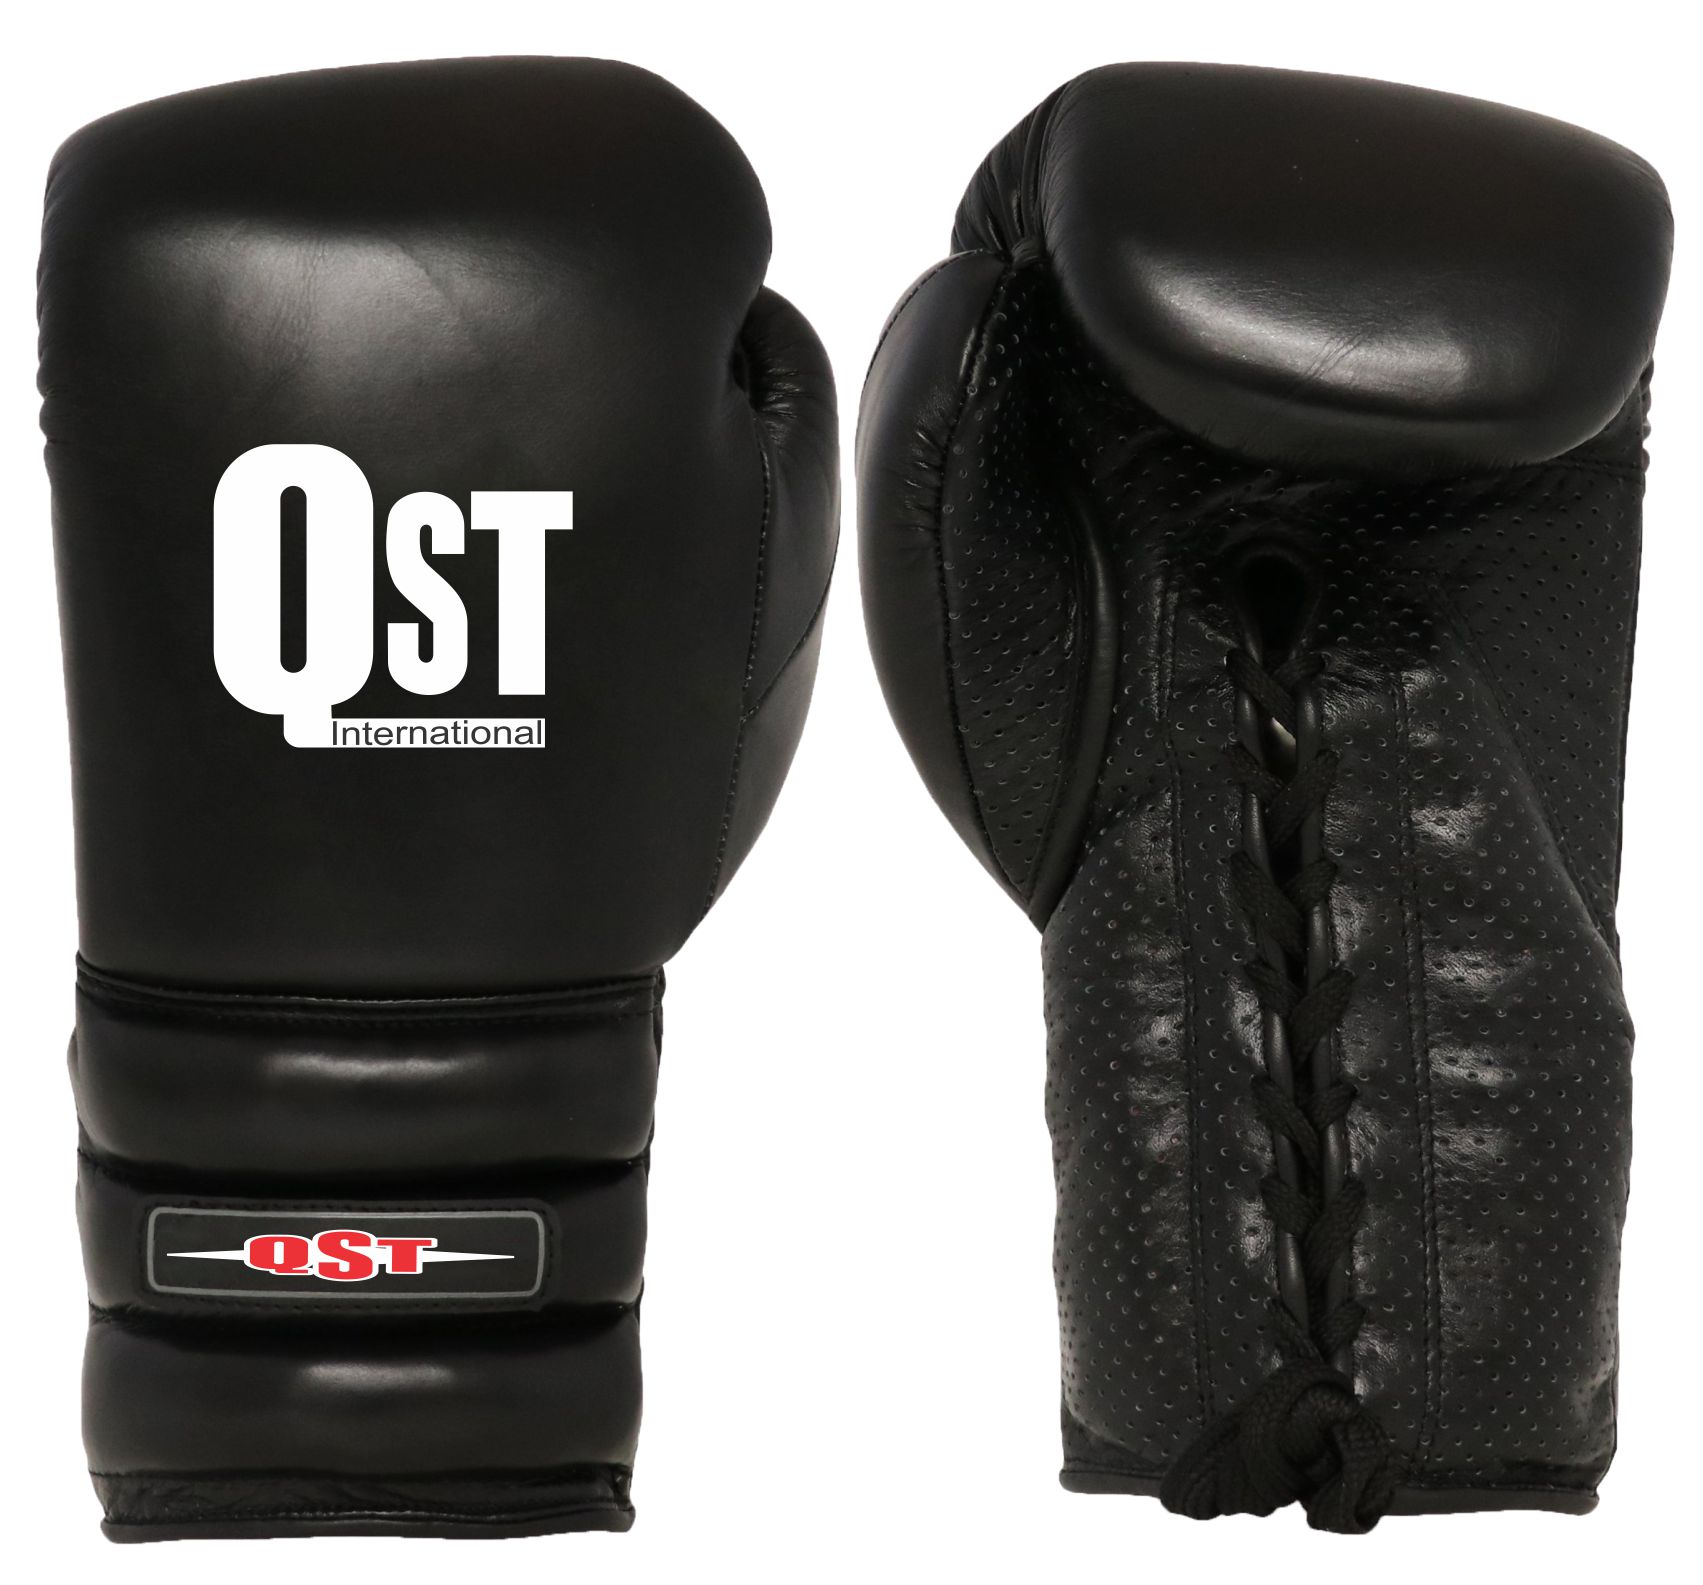 Lace up Boxing Gloves - PRG-3257